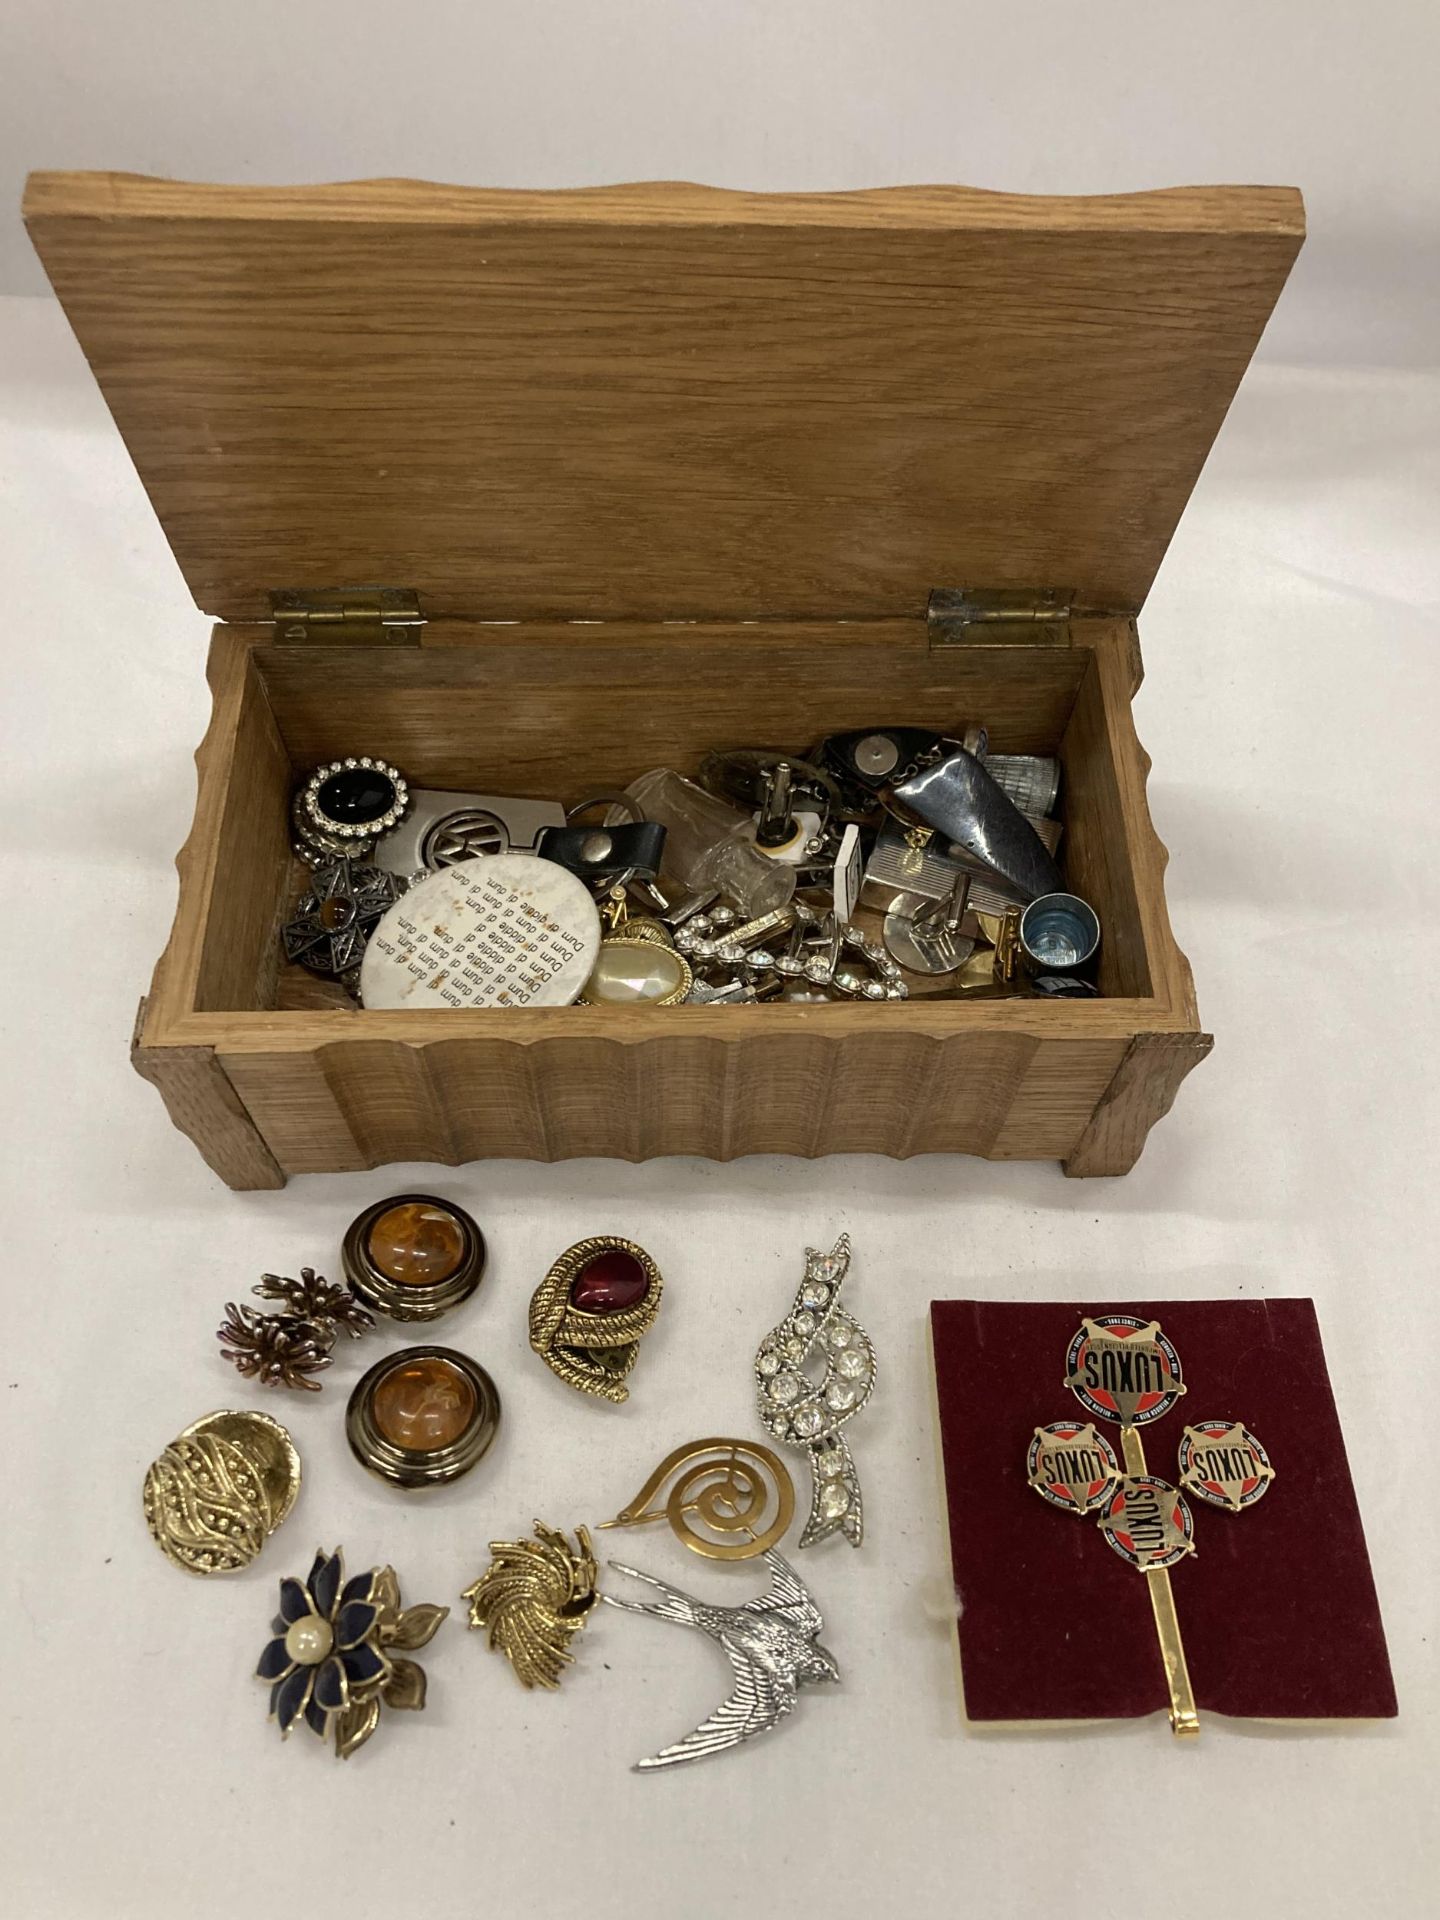 A WOODEN BOX CONTAINING A QUANTITY OF COSTUME JEWELLERY TO INCLUDE BROOCHES, BADGES, CUFFLINKS,